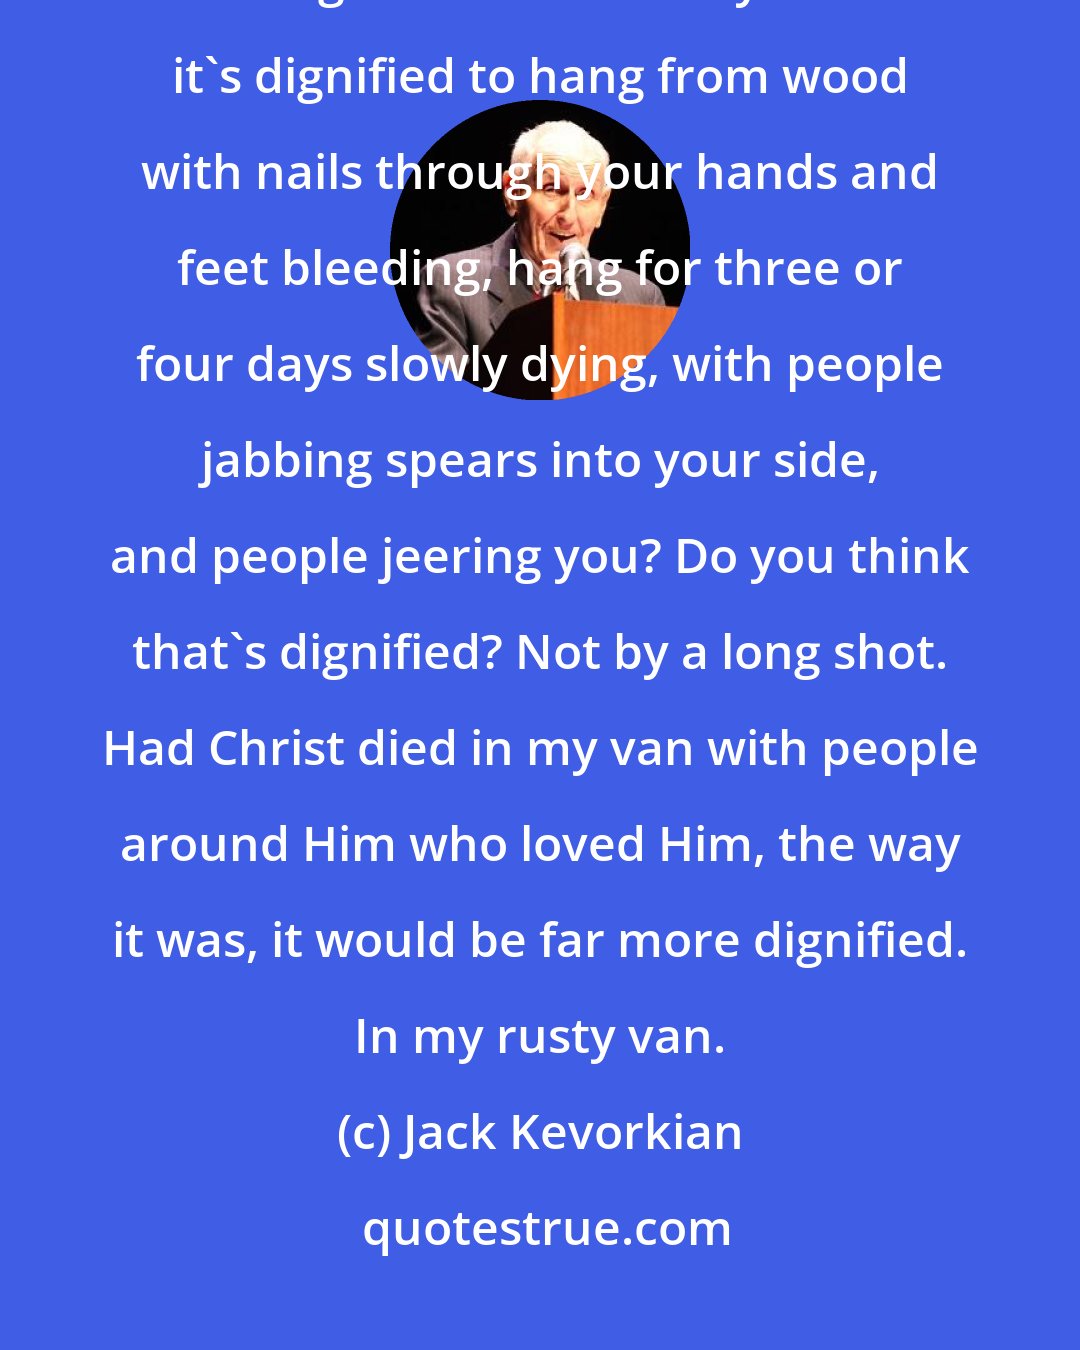 Jack Kevorkian: Well, let's take what people think is a dignified death. Christ - was that a dignified death? Do you think it's dignified to hang from wood with nails through your hands and feet bleeding, hang for three or four days slowly dying, with people jabbing spears into your side, and people jeering you? Do you think that's dignified? Not by a long shot. Had Christ died in my van with people around Him who loved Him, the way it was, it would be far more dignified. In my rusty van.